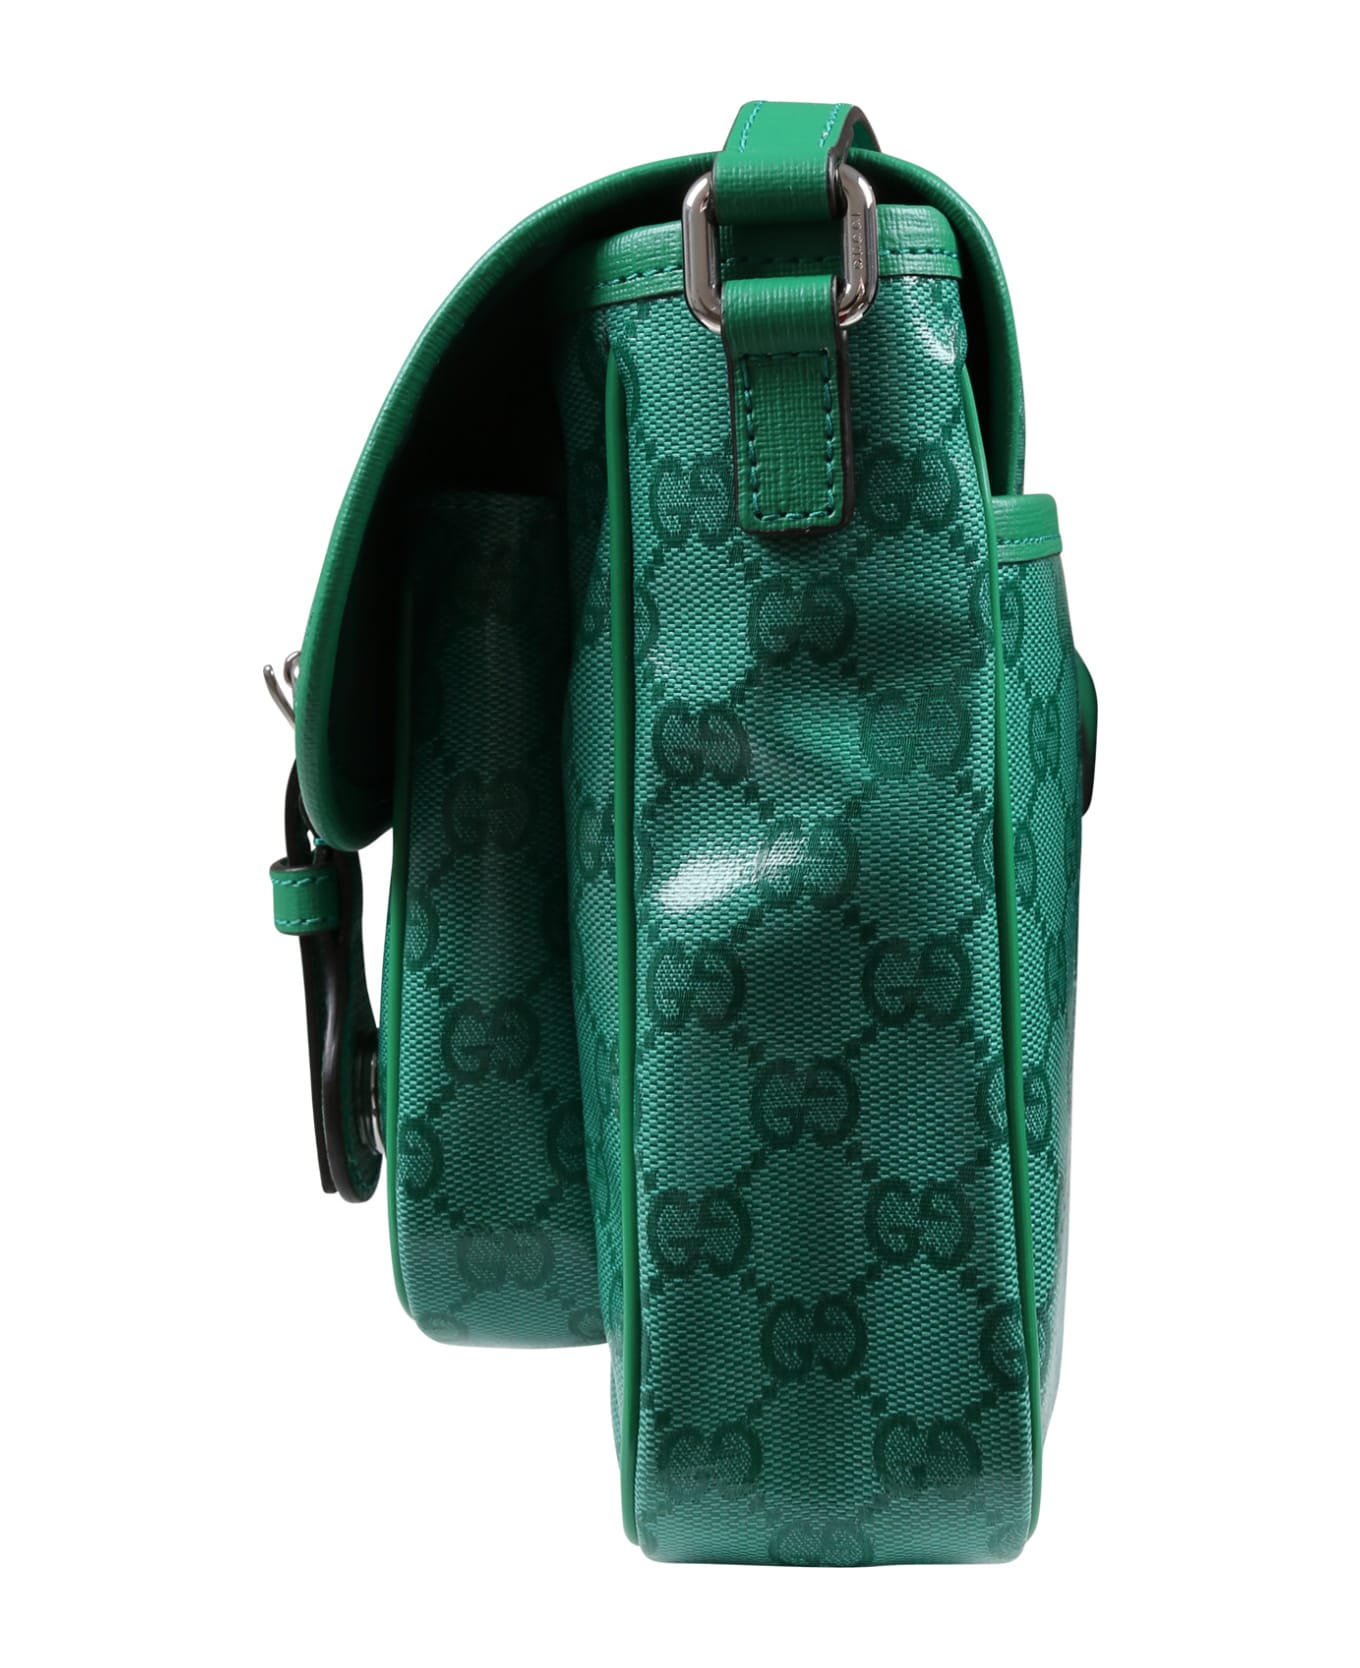 Gucci Green Bag For Girl With Gg Motif - Green アクセサリー＆ギフト